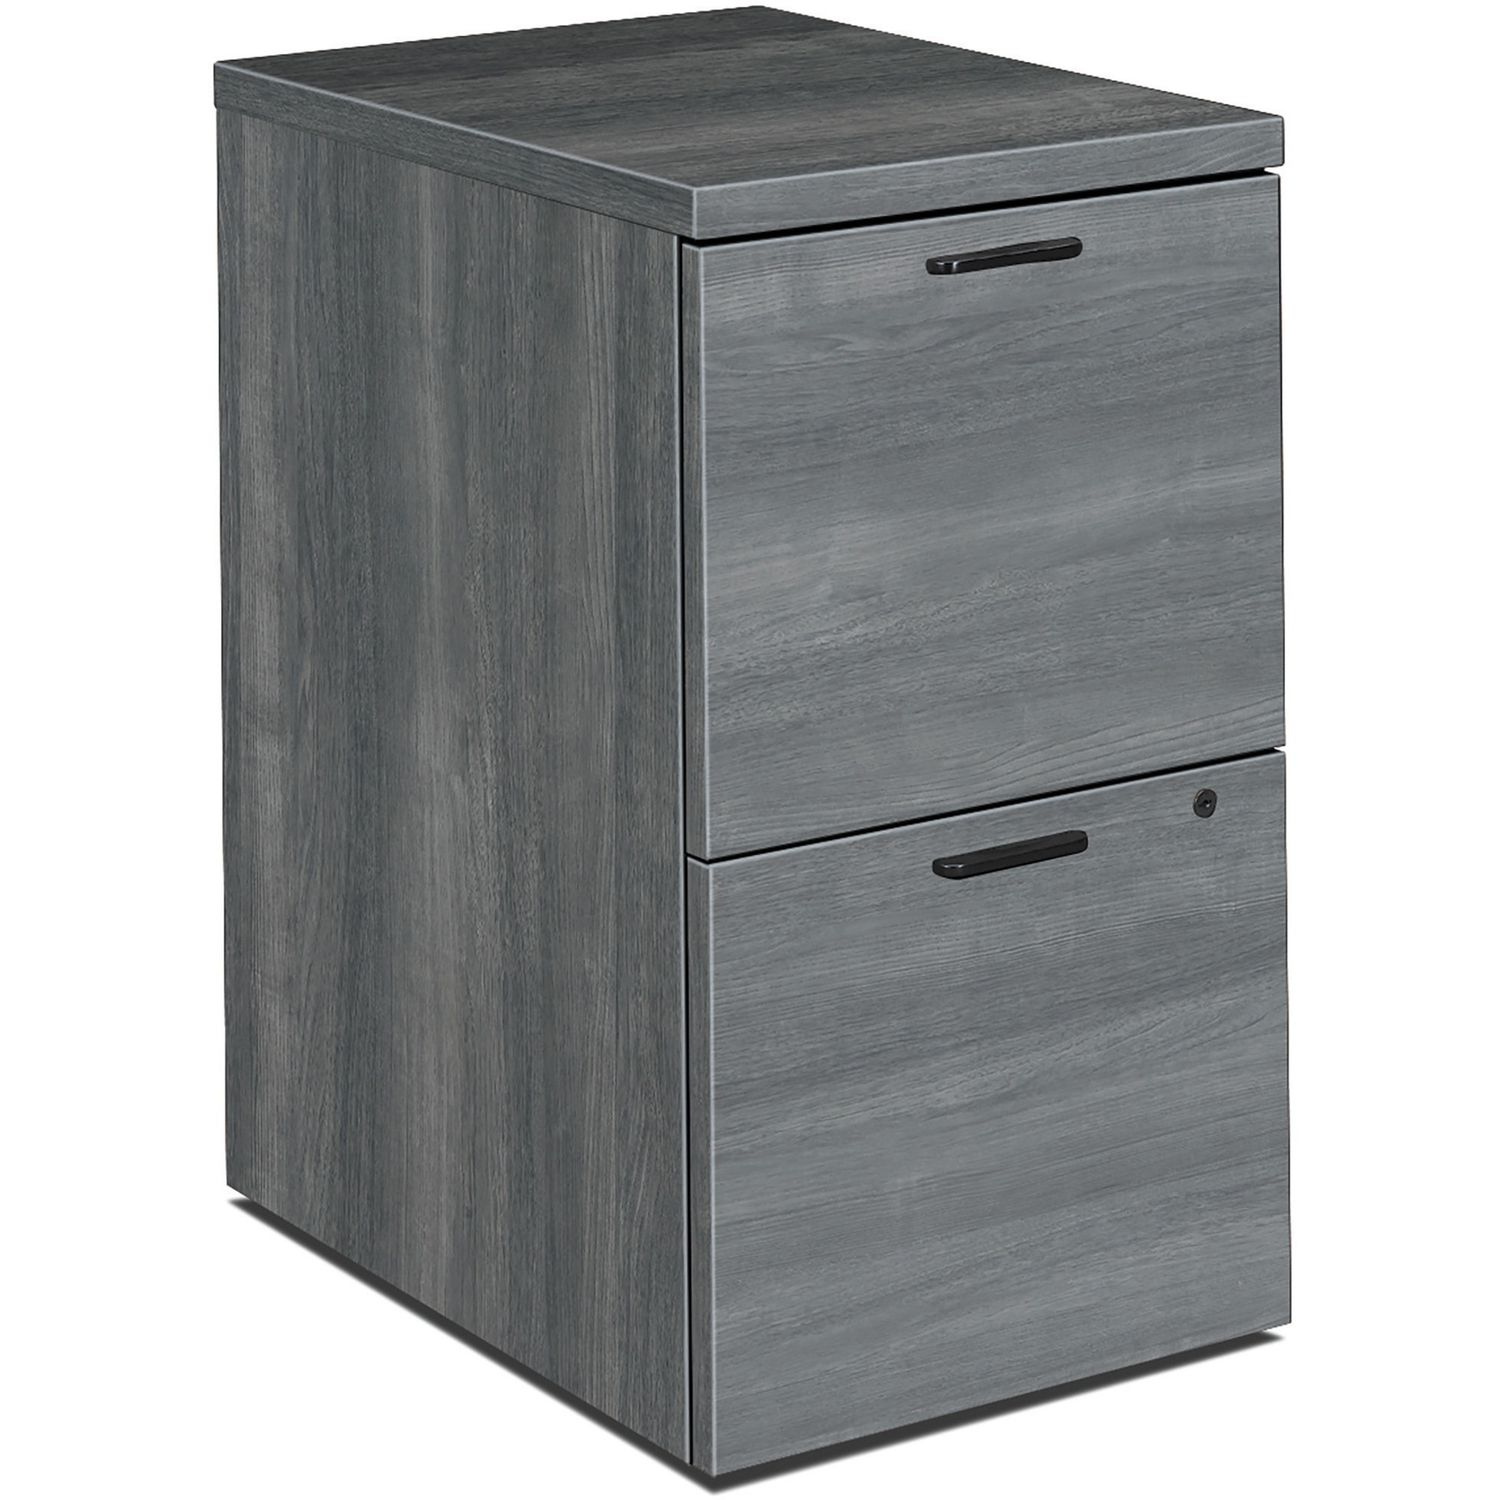 10500 Series Mobile Pedestal 15.8" x 22.8"28" , 2" Caster, 2 x File Drawer(s), Flat Edge, Material: Thermofused Laminate (TFL), Wood, Finish: Sterling Ash Laminate